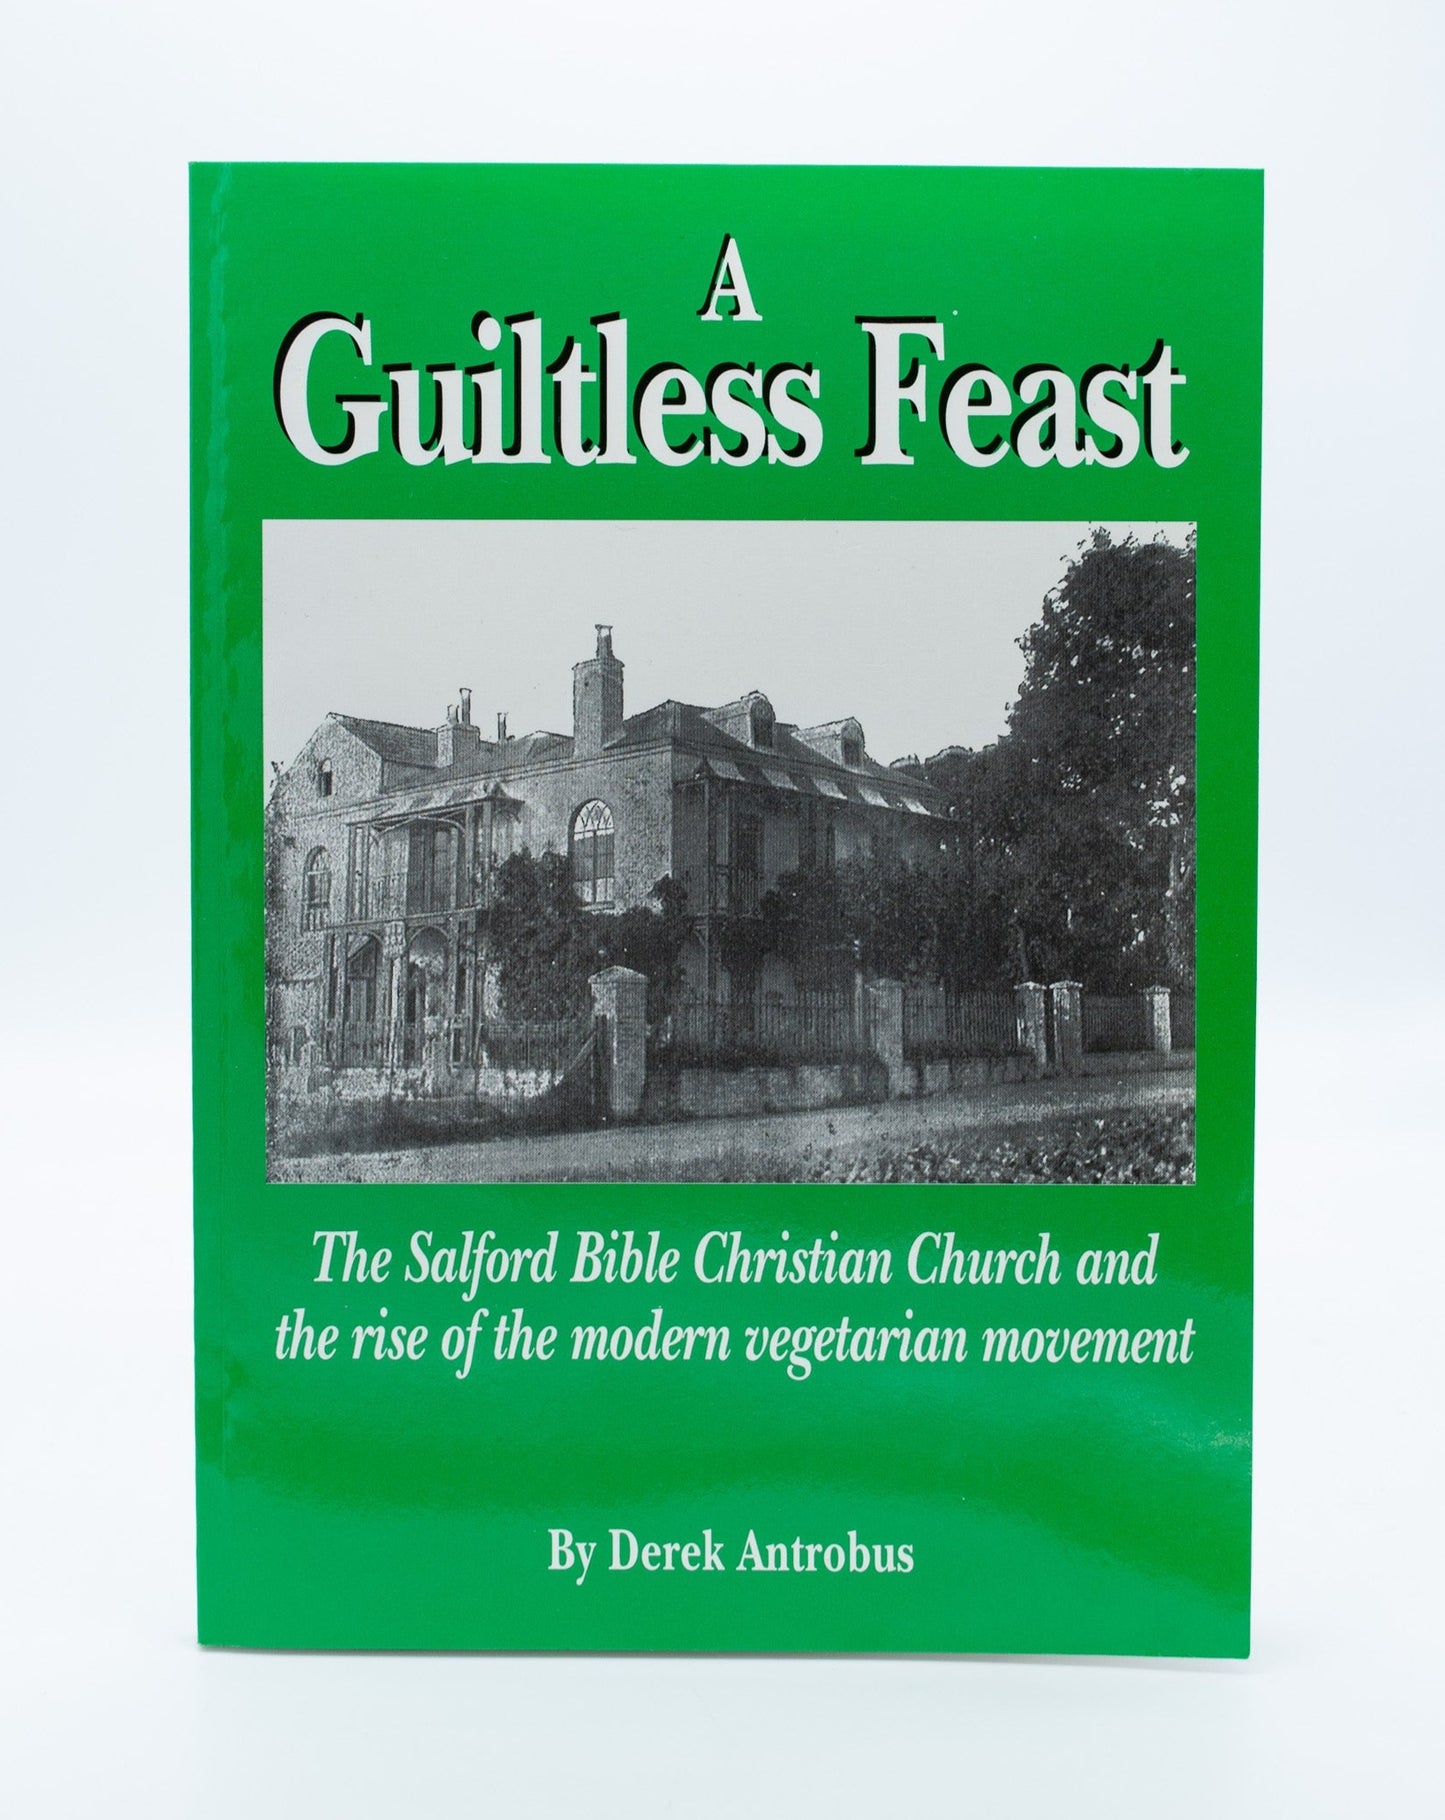 A Guiltless Feast: The Salford Bible Christian Church and the rise of the modern vegetarian movement